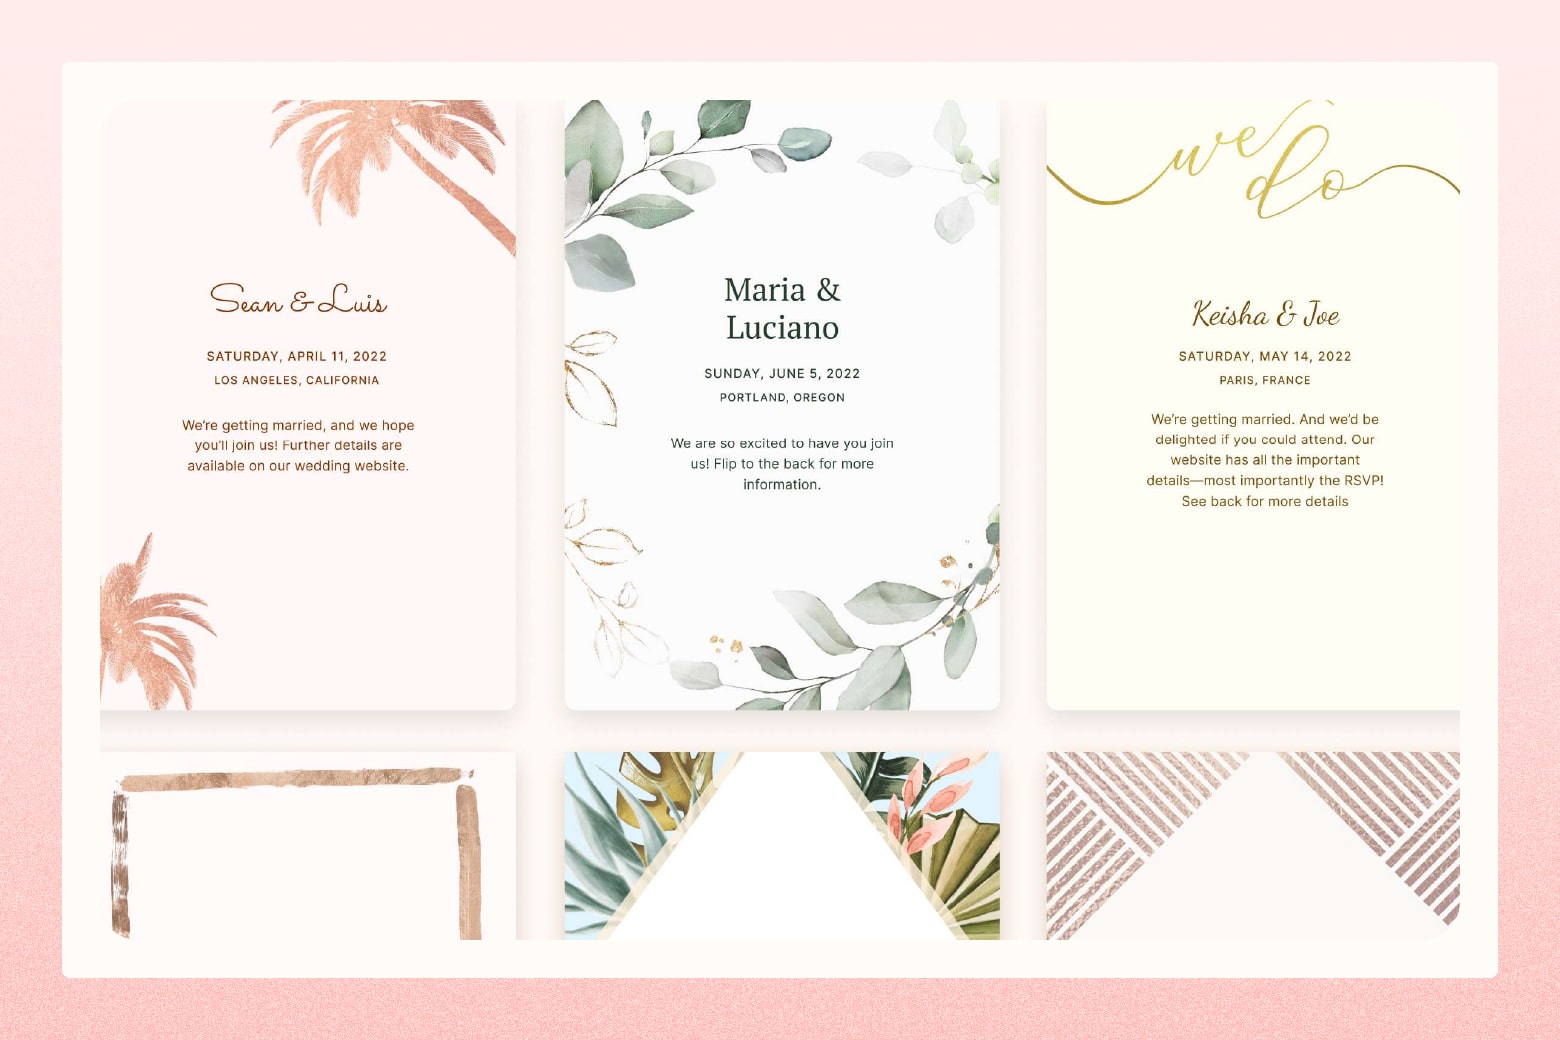 Three different wedding invitations laid side by side